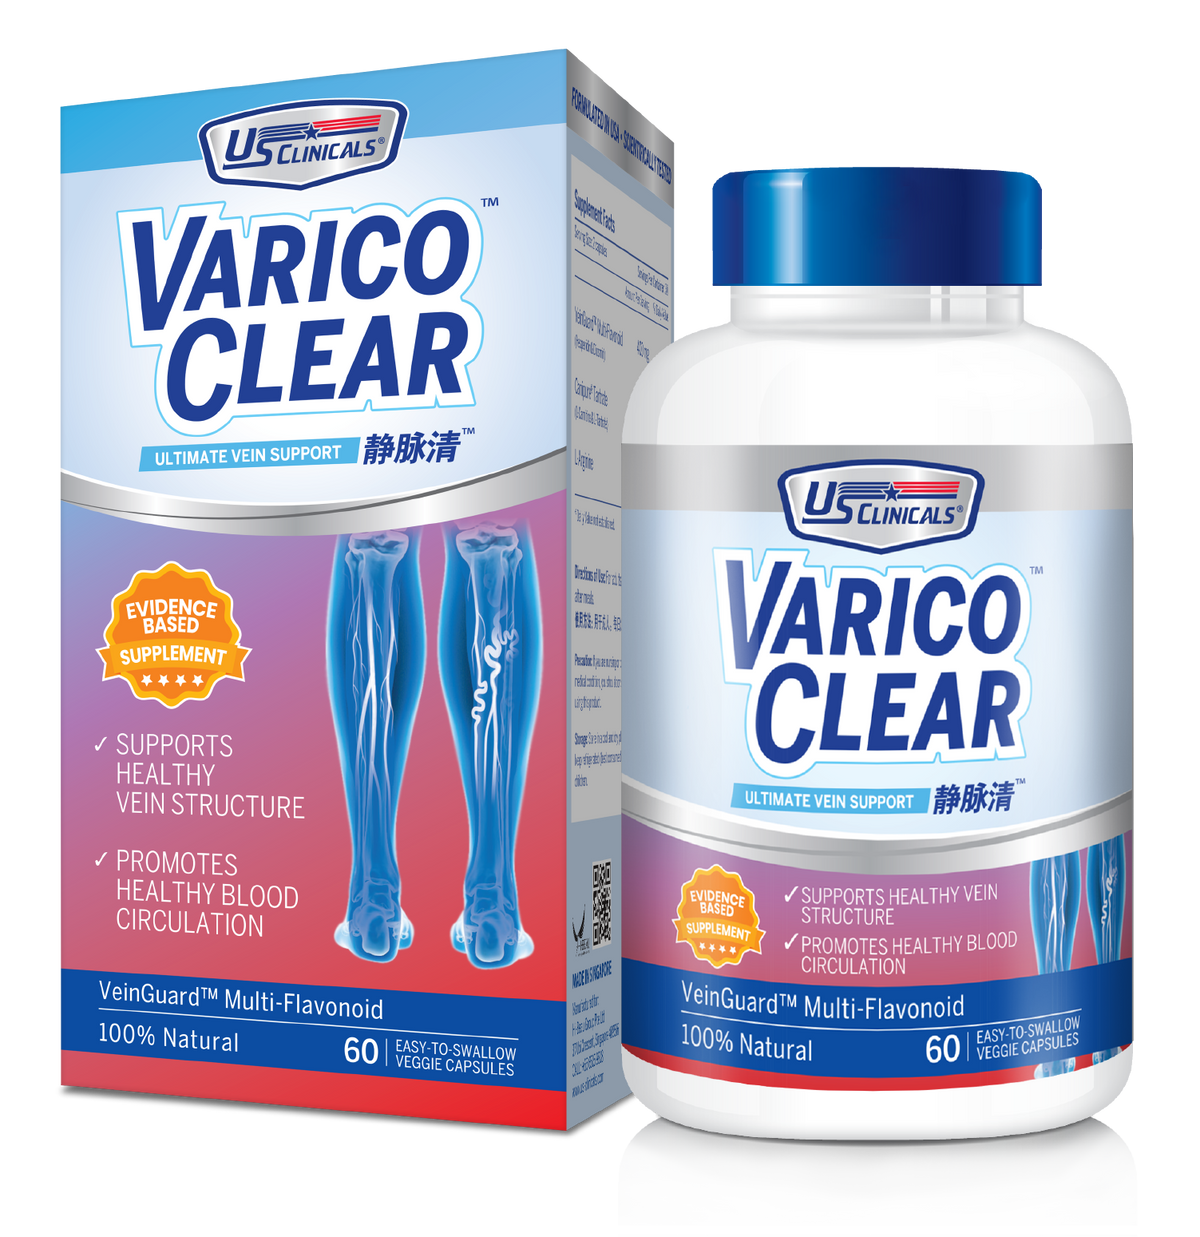 Singapore vein support supplement - US Clinicals VaricoClear